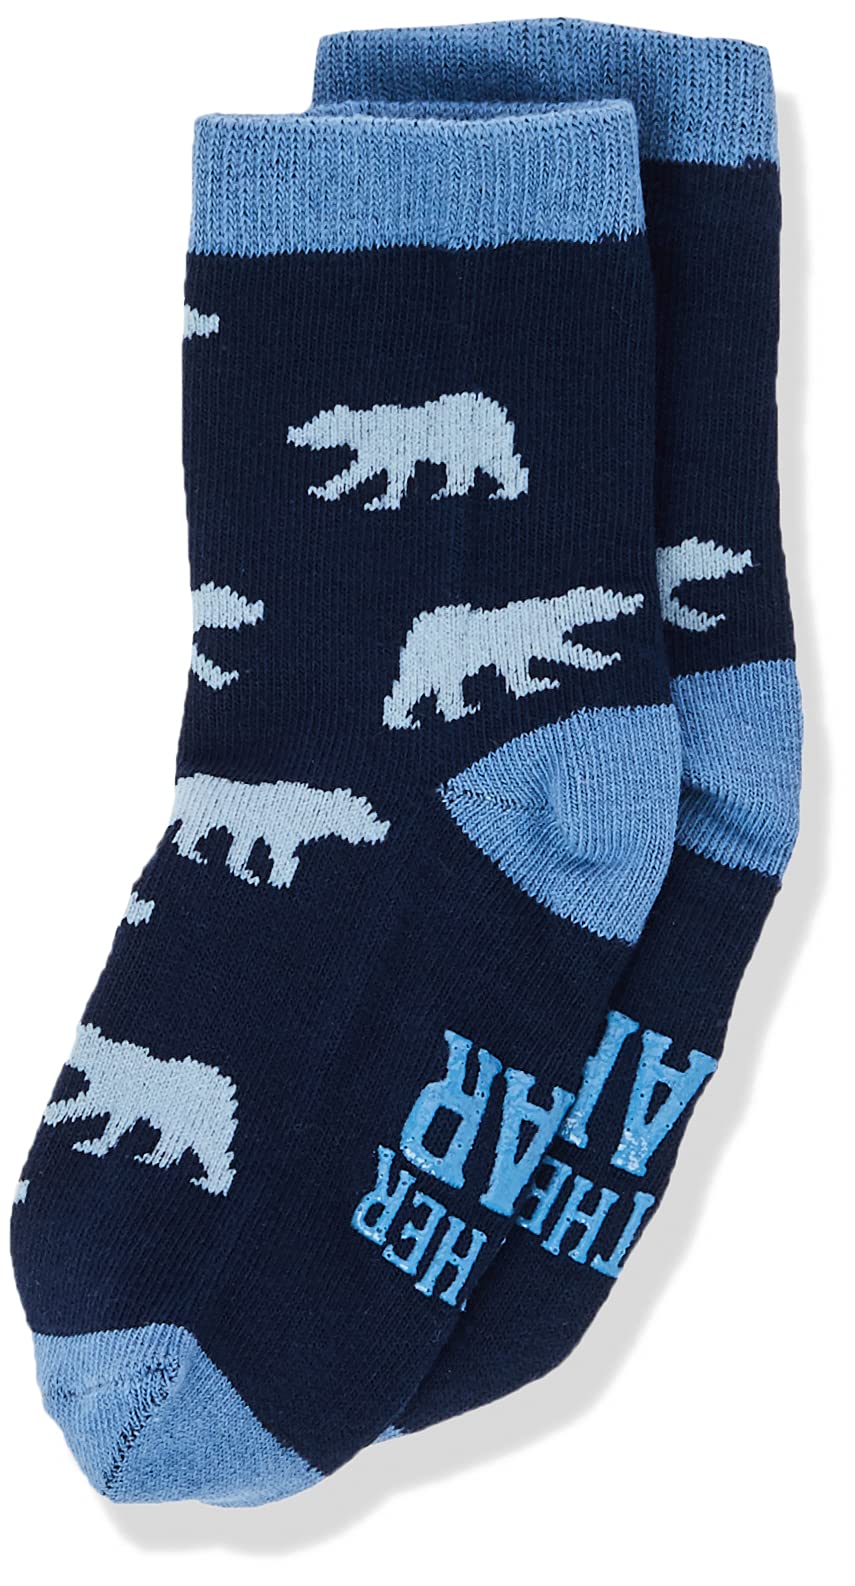 Little Blue House by Hatley Kids' Animal Crew Socks, Brother Bear, Large (4-7 Years Old)